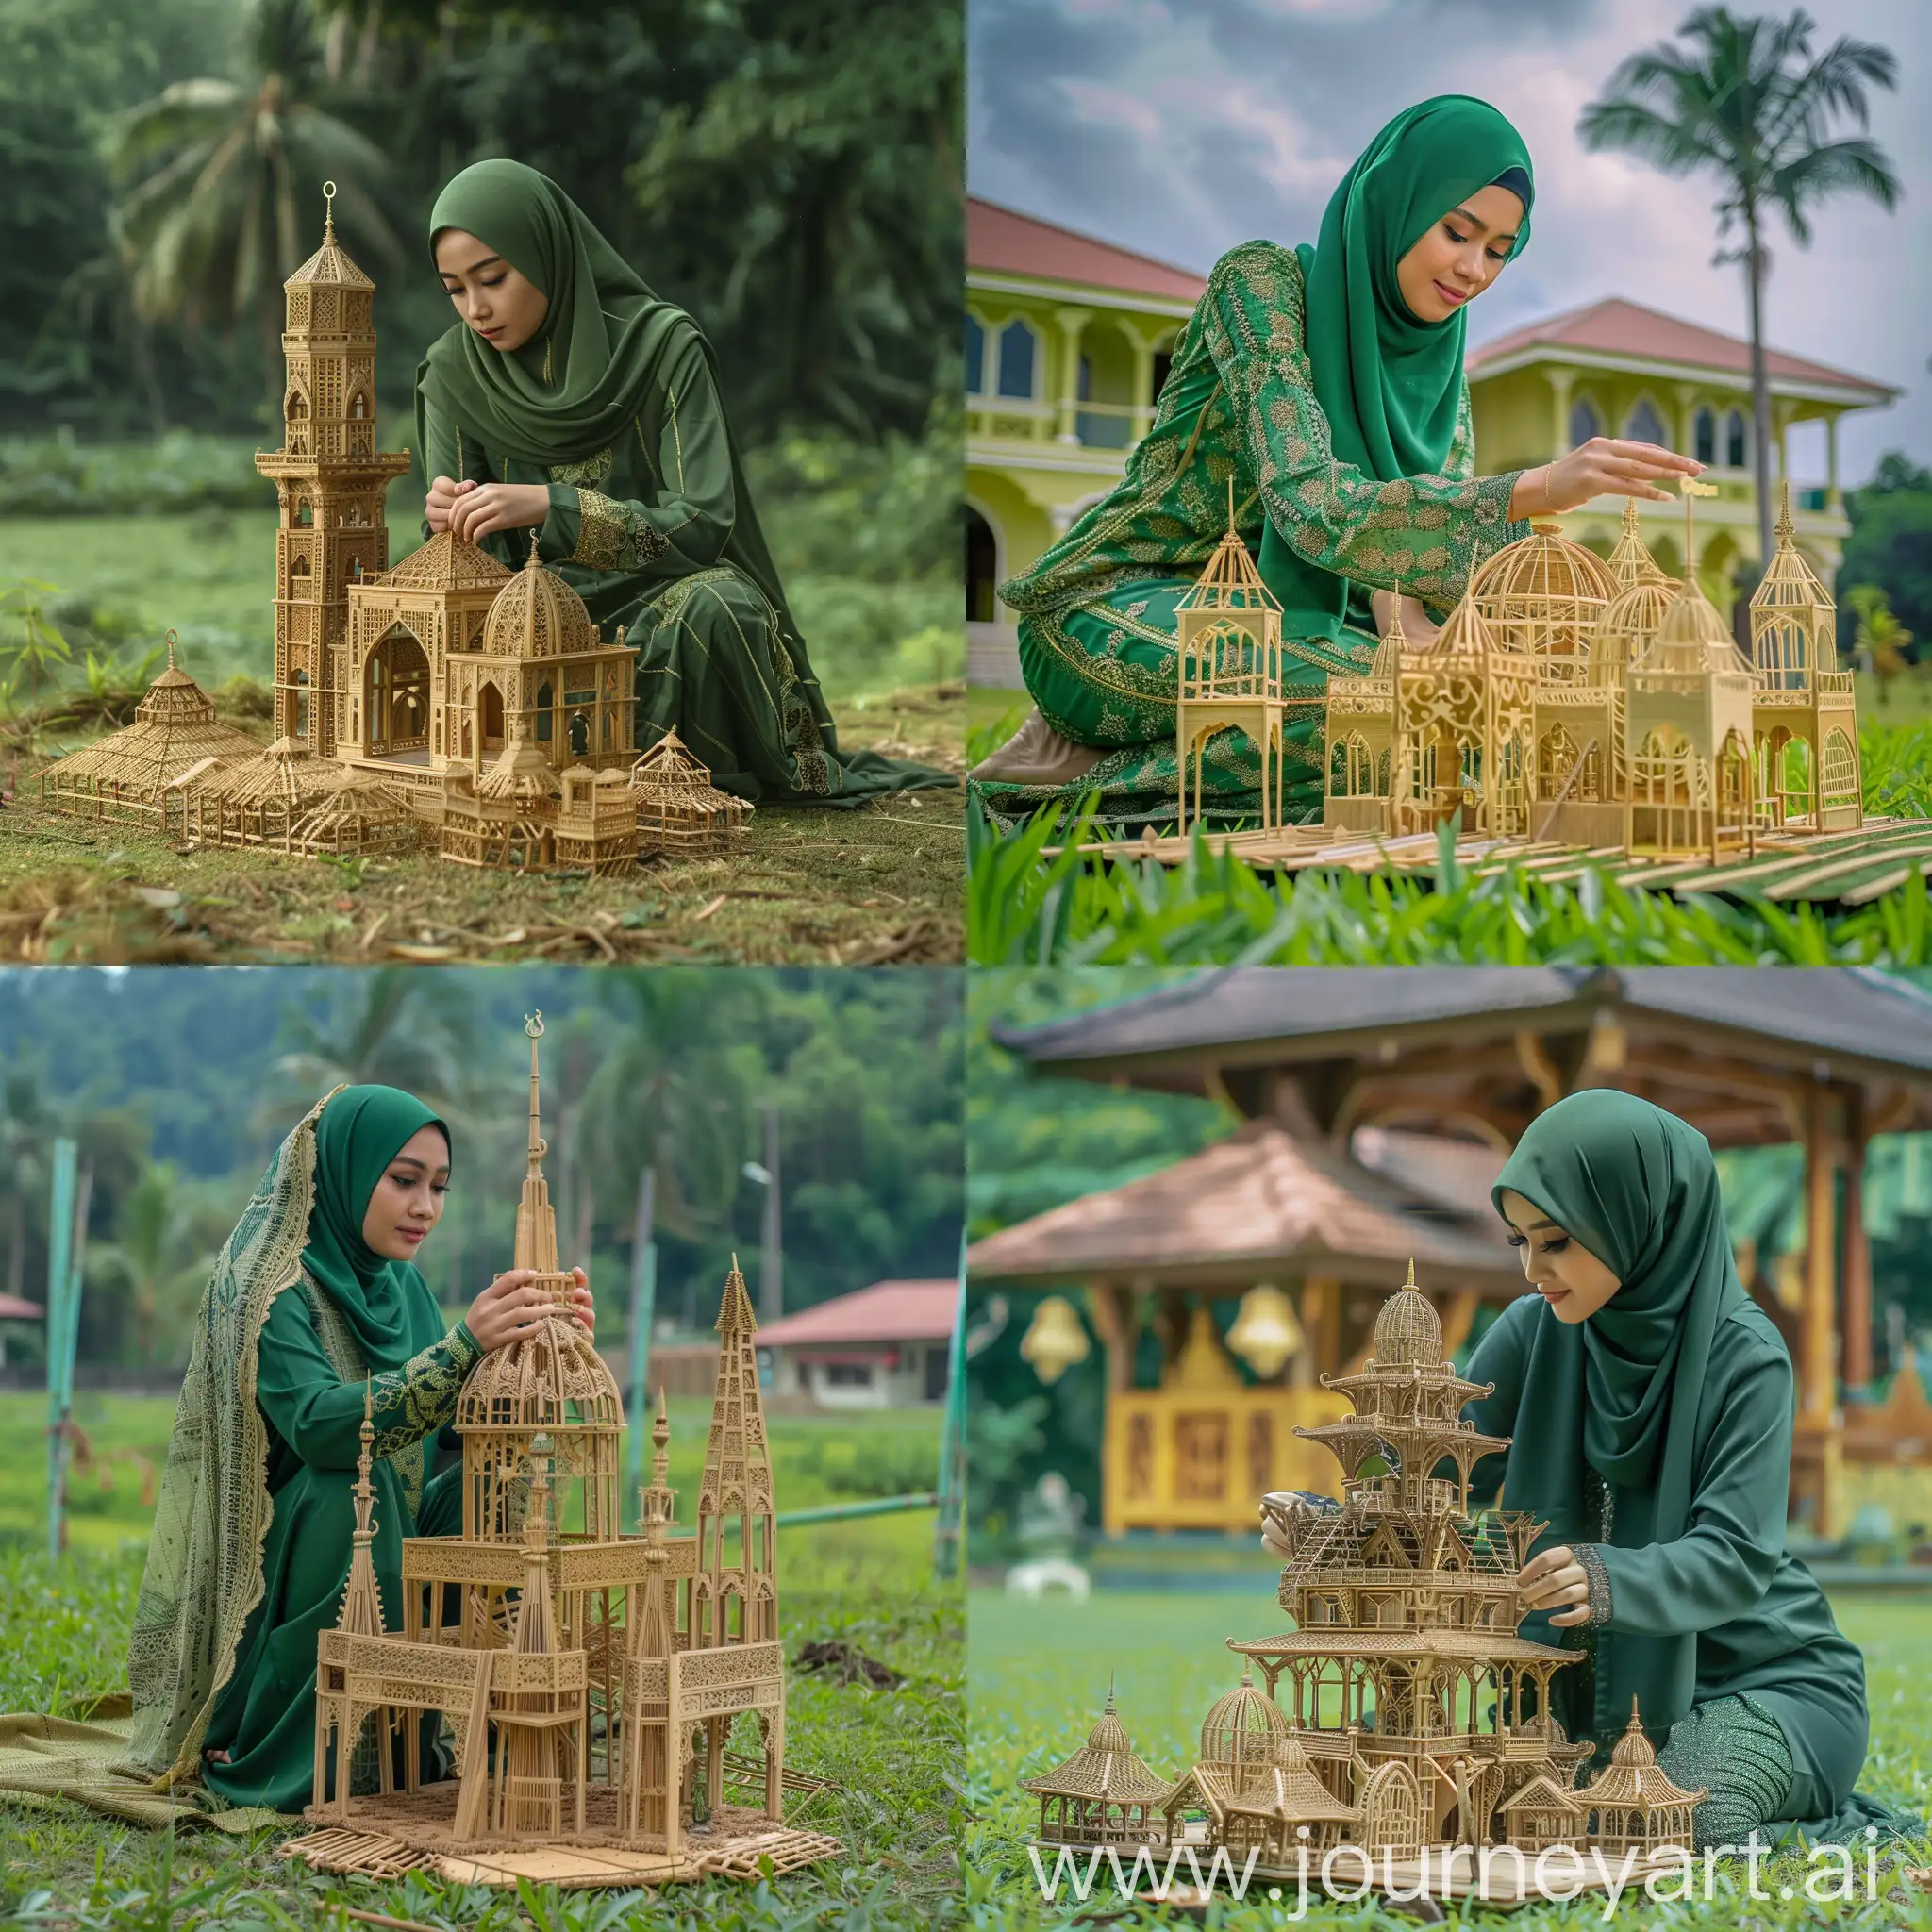 Muslim-Woman-Building-Large-Bamboo-Mosque-Miniature-Outdoors